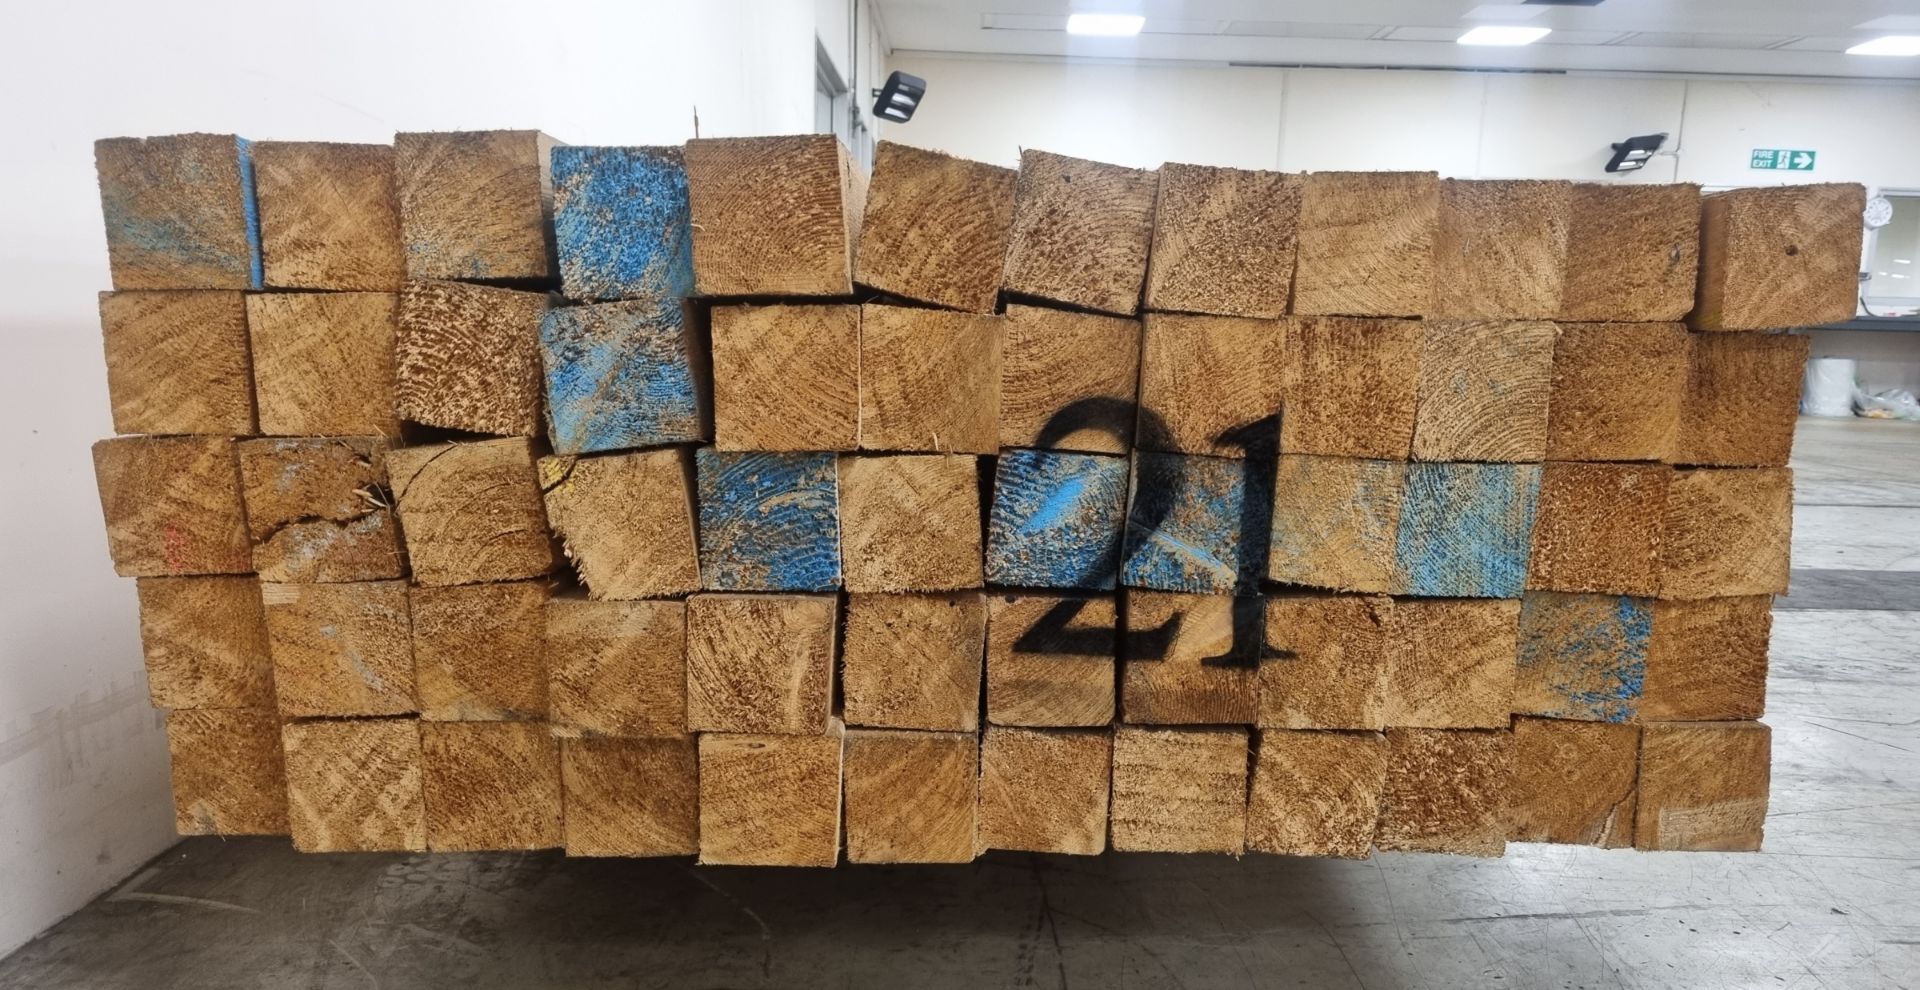 Pallet of 4"x4" (10x10cm) softwood, heat treated and debarked (GBFC-0452 DBHT) L420cm x 60 pcs - Image 3 of 3